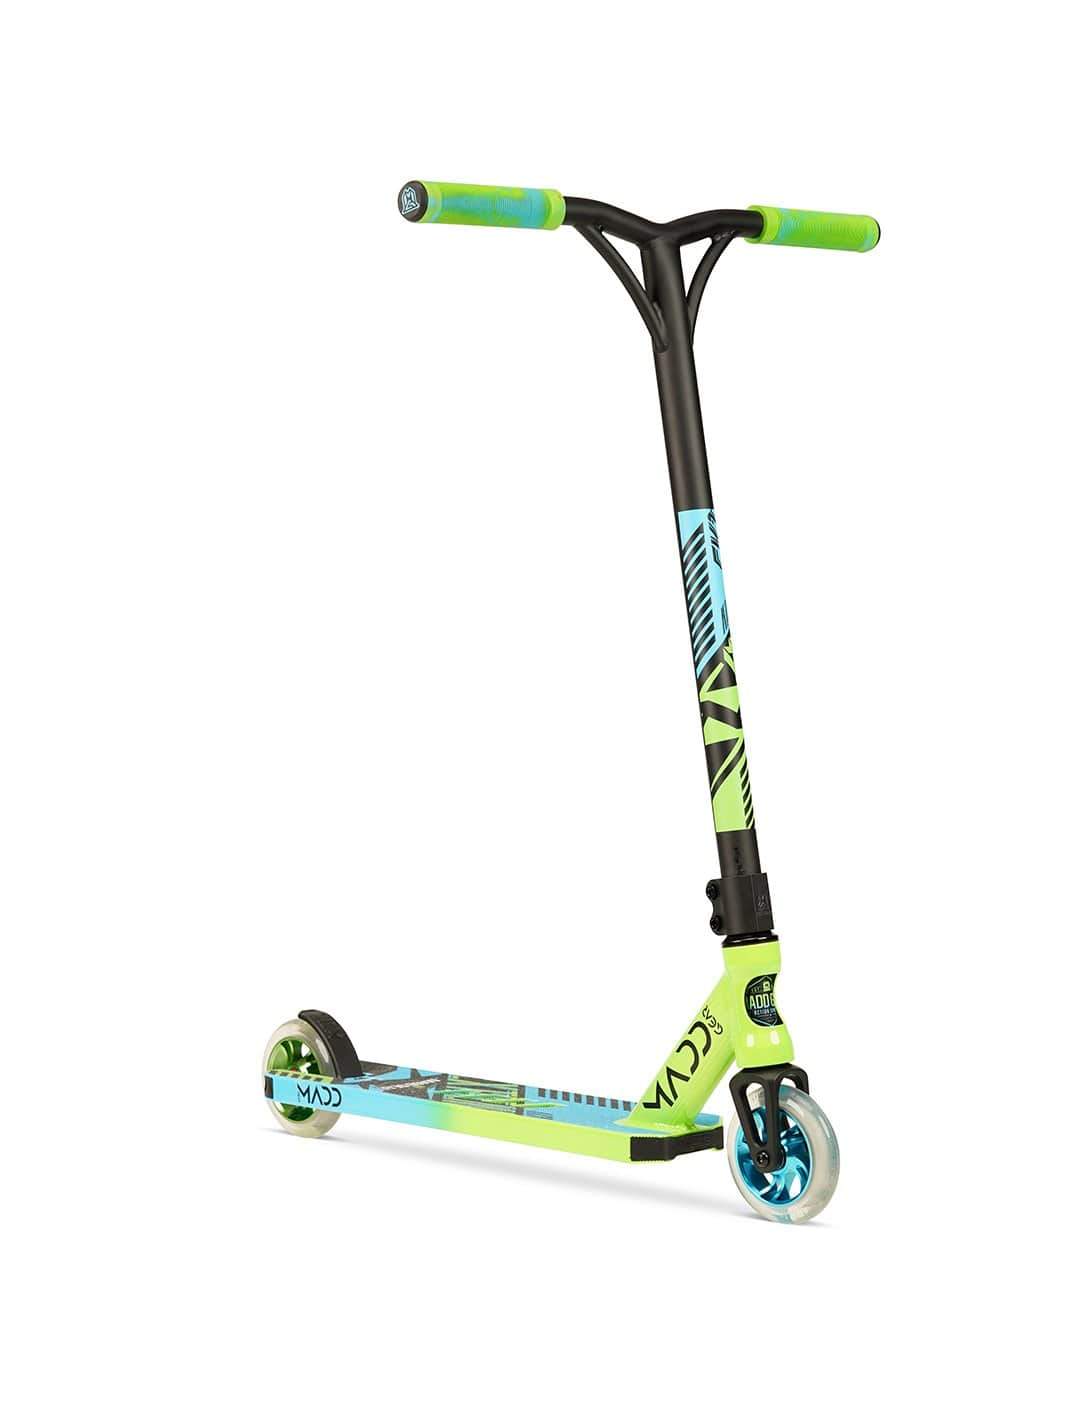 Madd Gear MGP Kick Extreme Stunt Scooter Complete High Quality Razor Pro Trick Skate Park Mad Green Blue